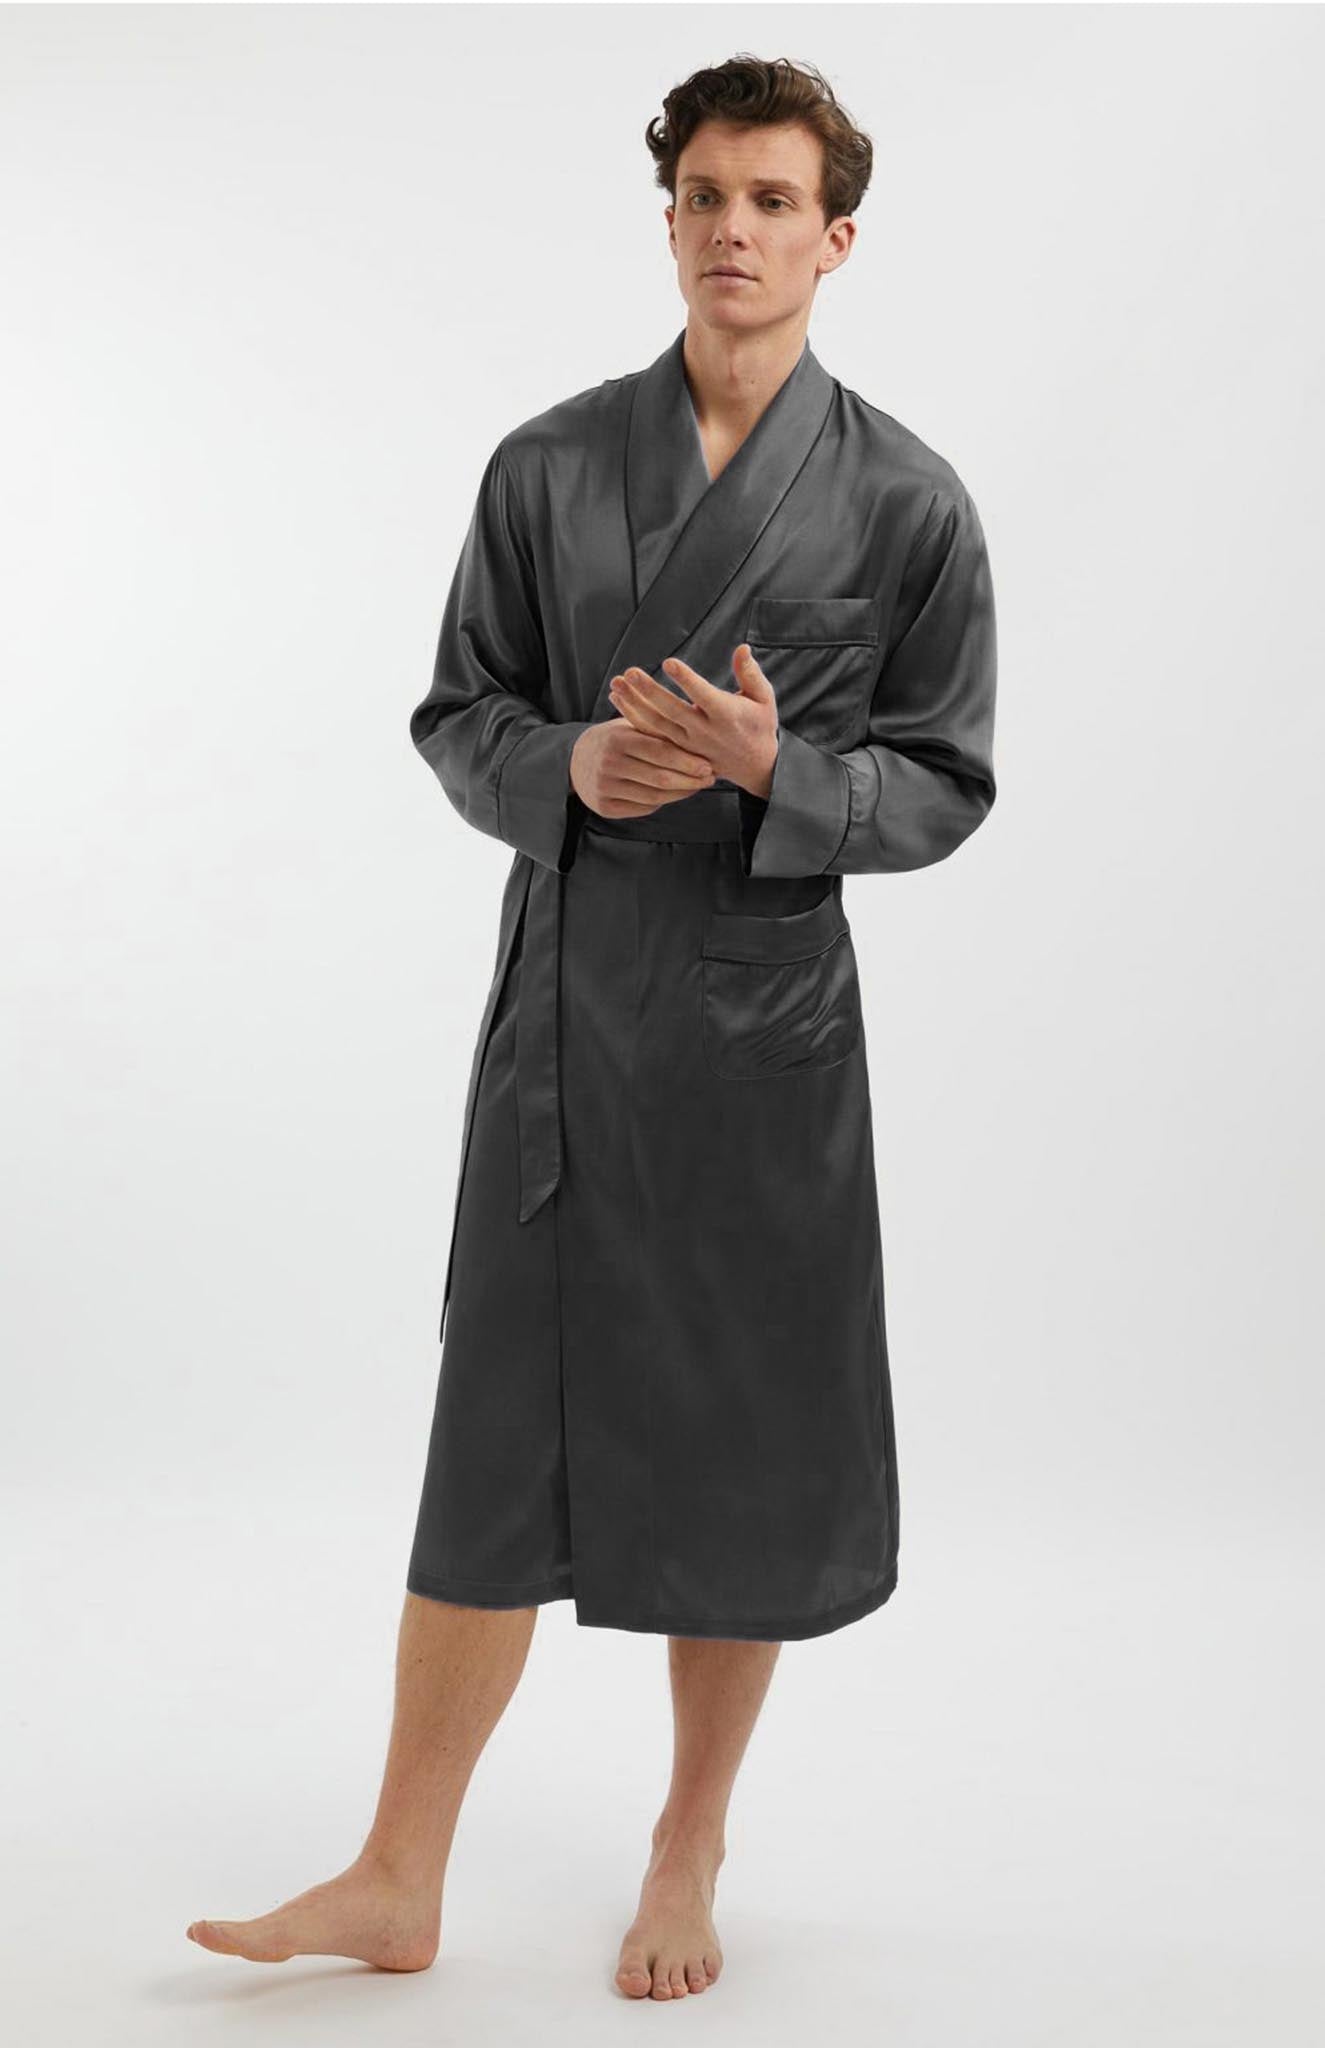 Charcoal Black Robe Luxurious Loungewear Collection for Men | Luxeliv